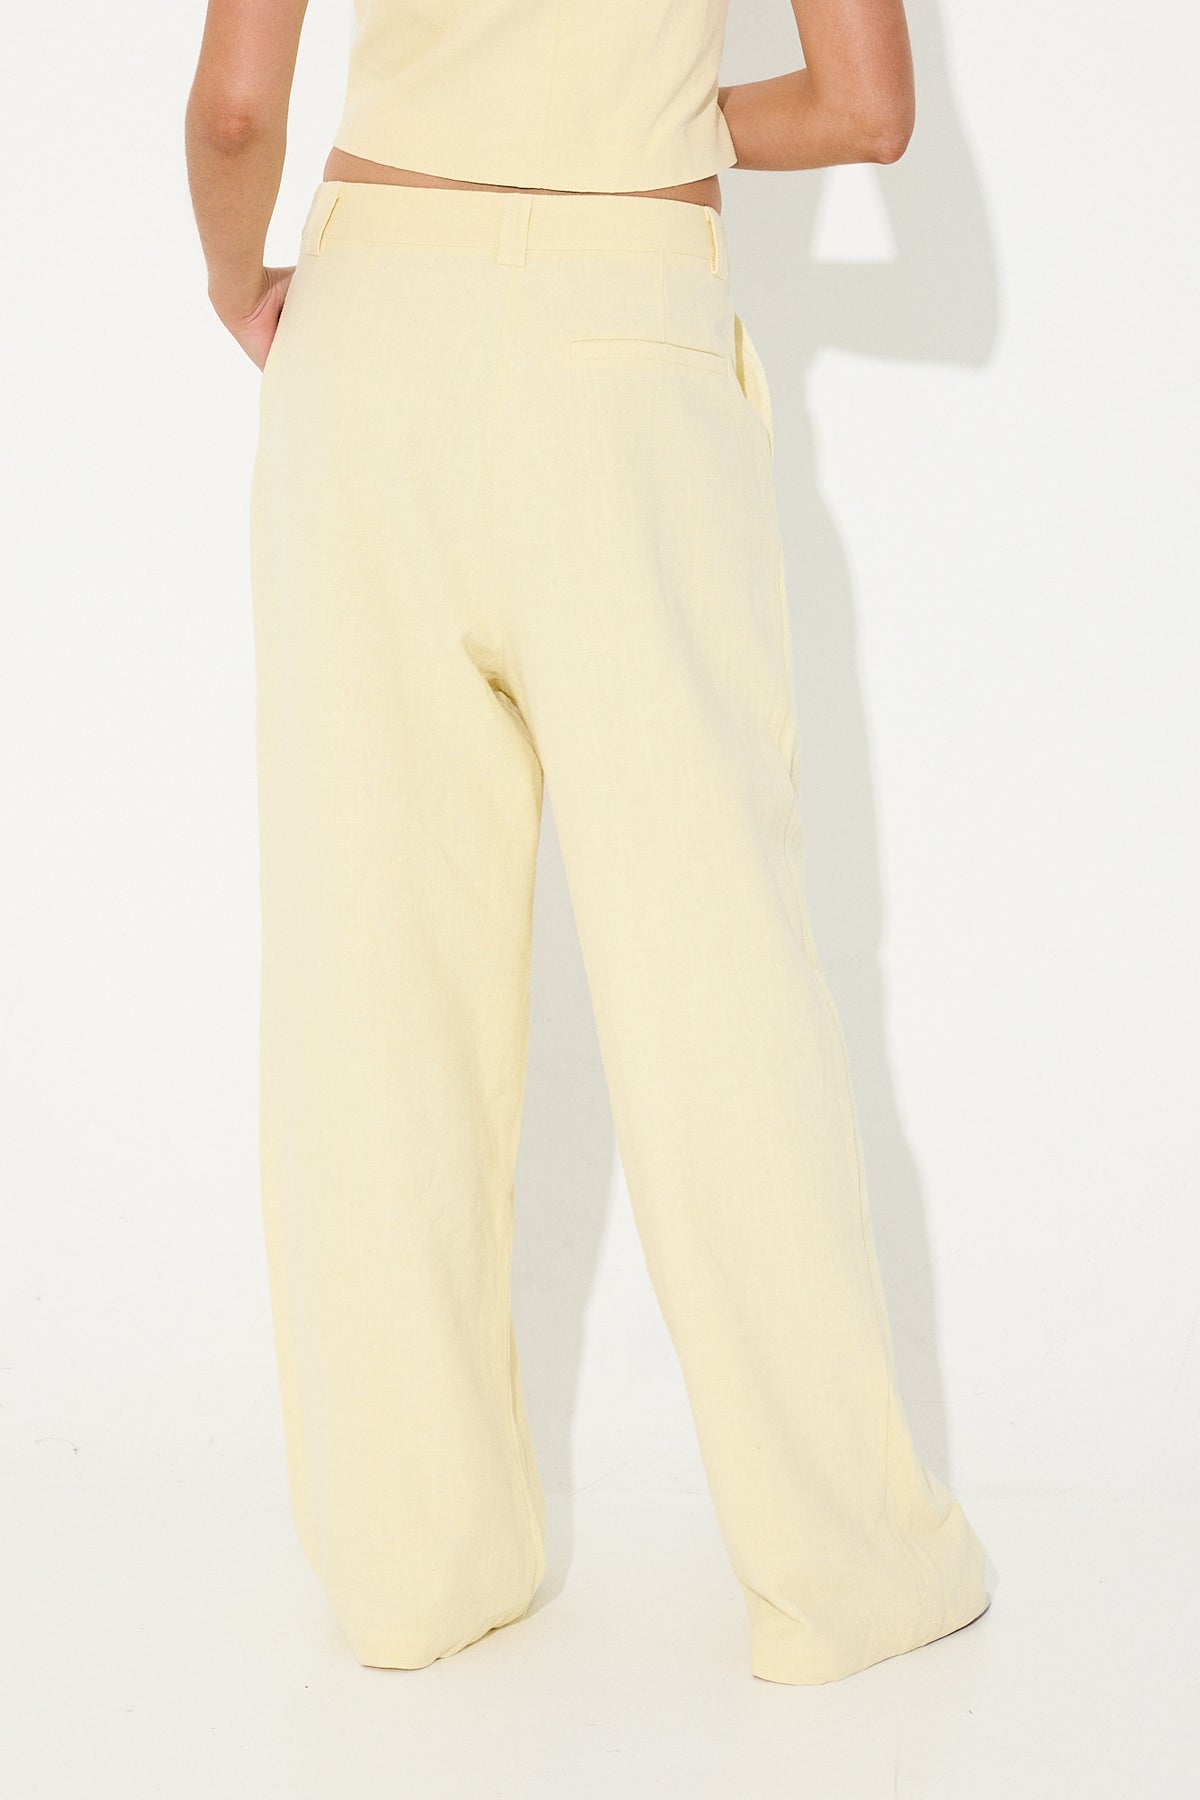 Leo Pant Butter